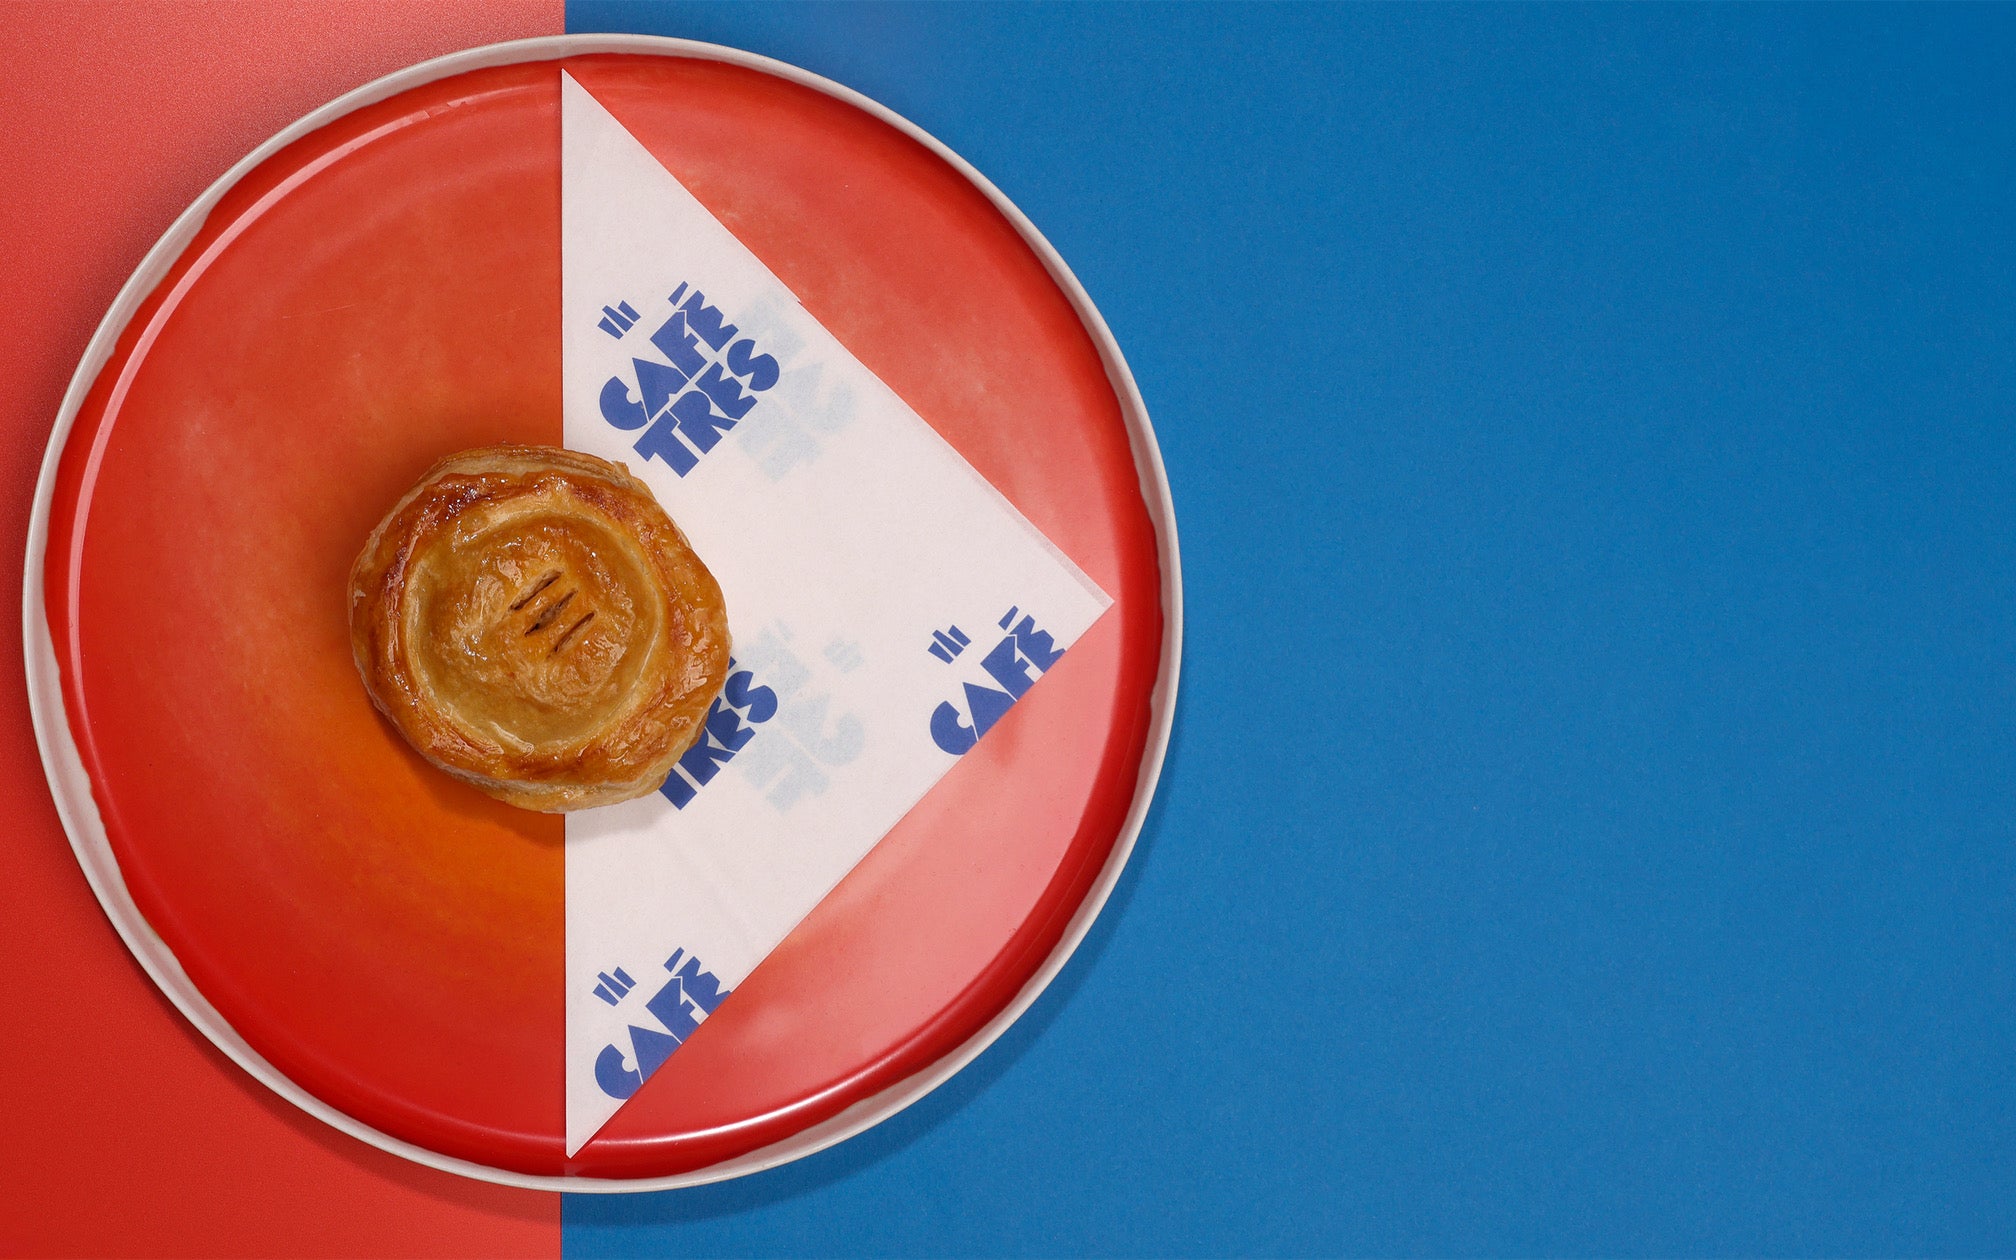 Pastelito On A Plate: Image By Jeremiah Corder